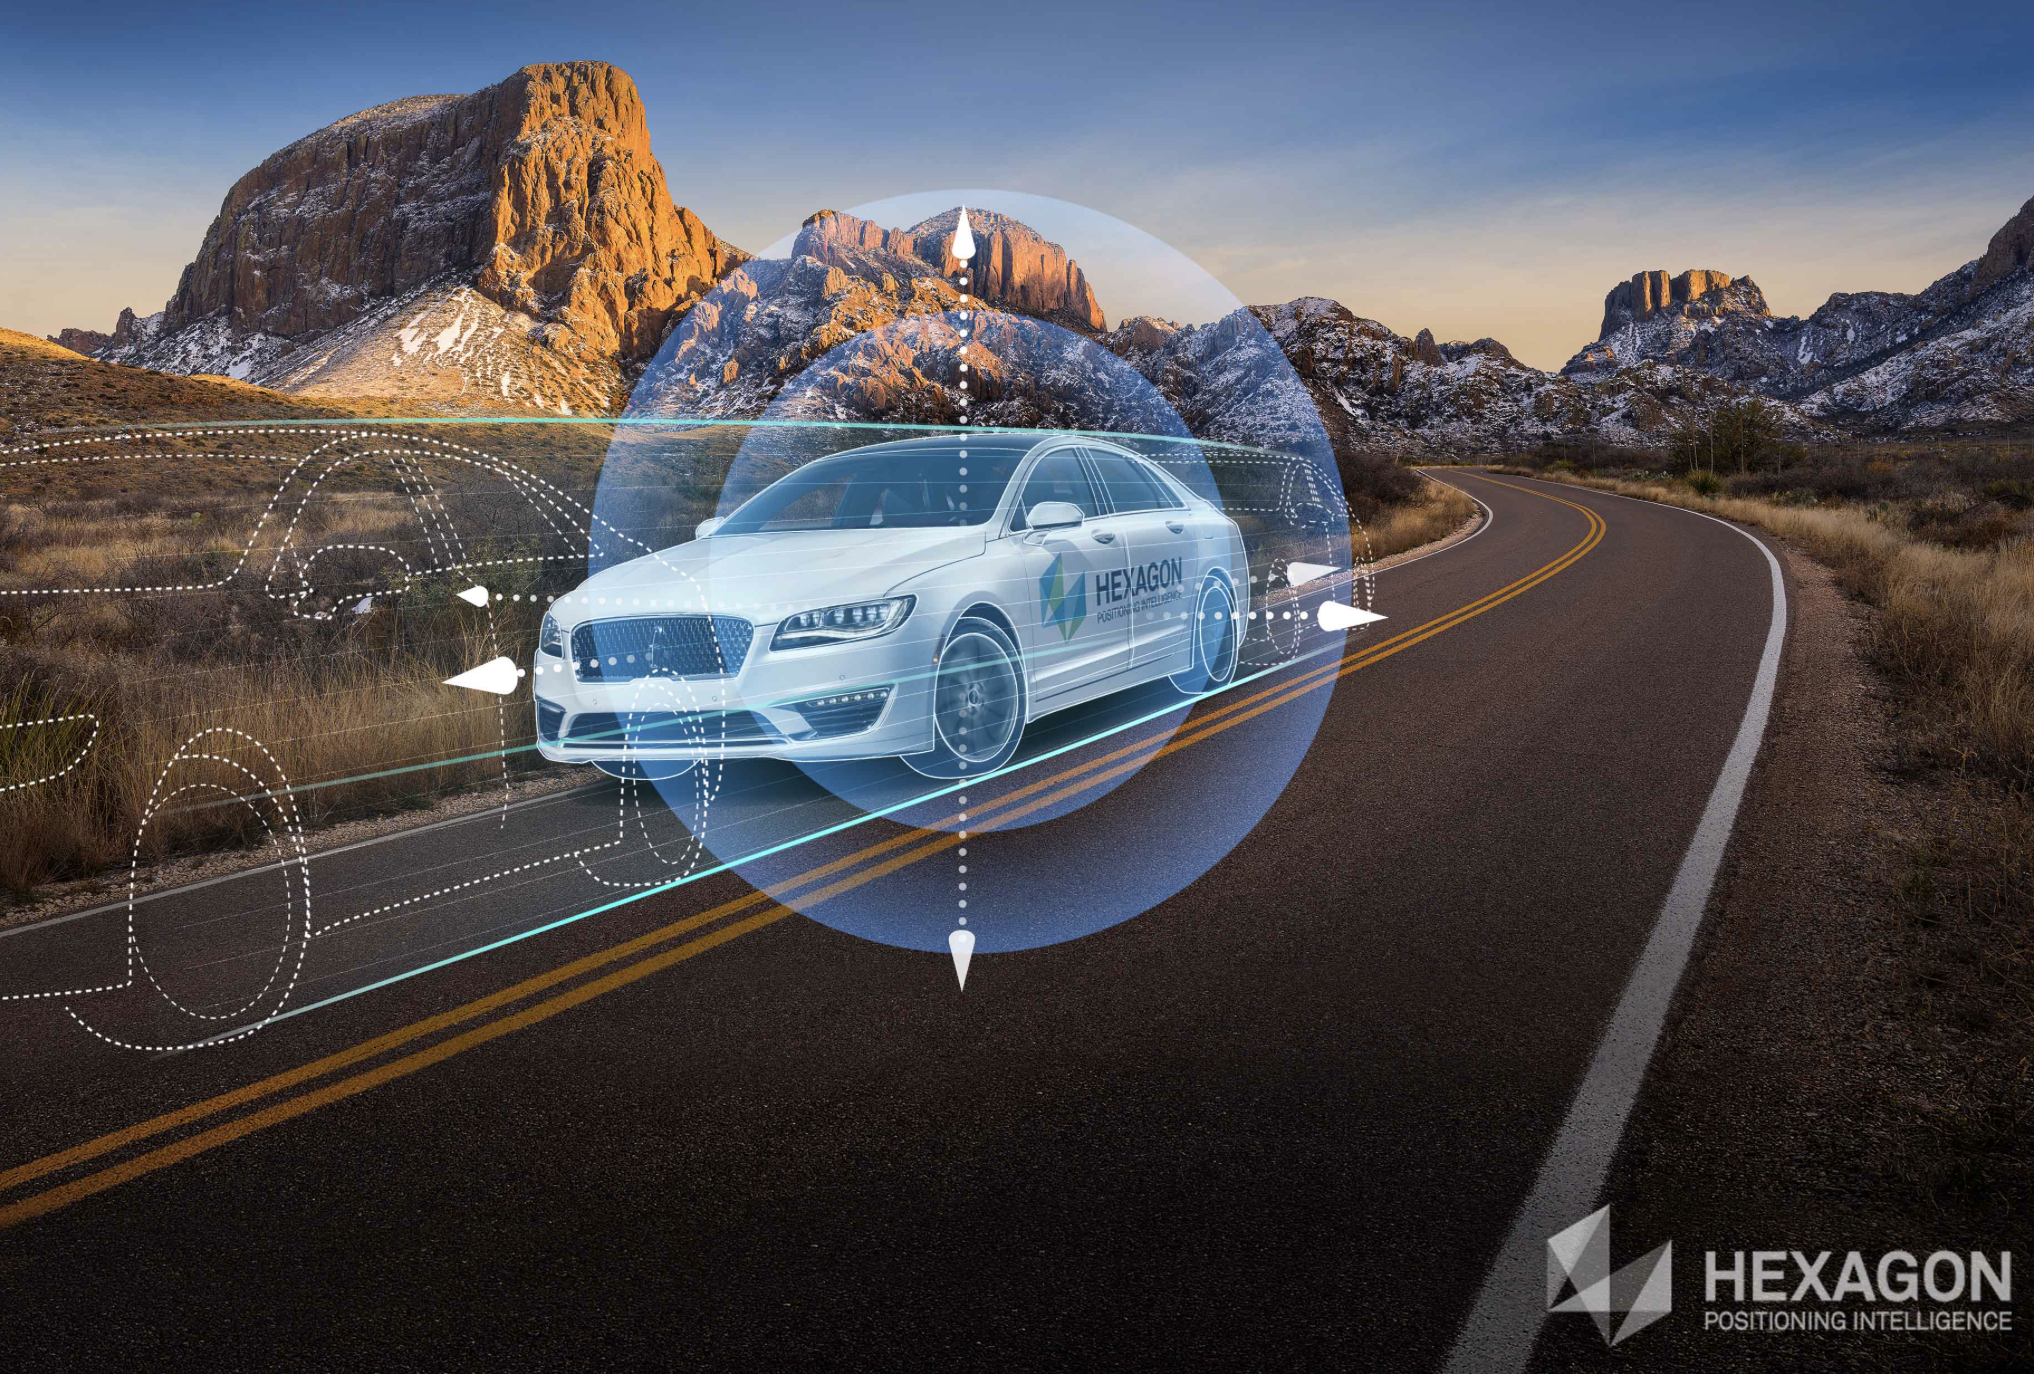 Hexagon's Positioning Intelligence Attains Major Milestone in the Drive to Safe Autonomy